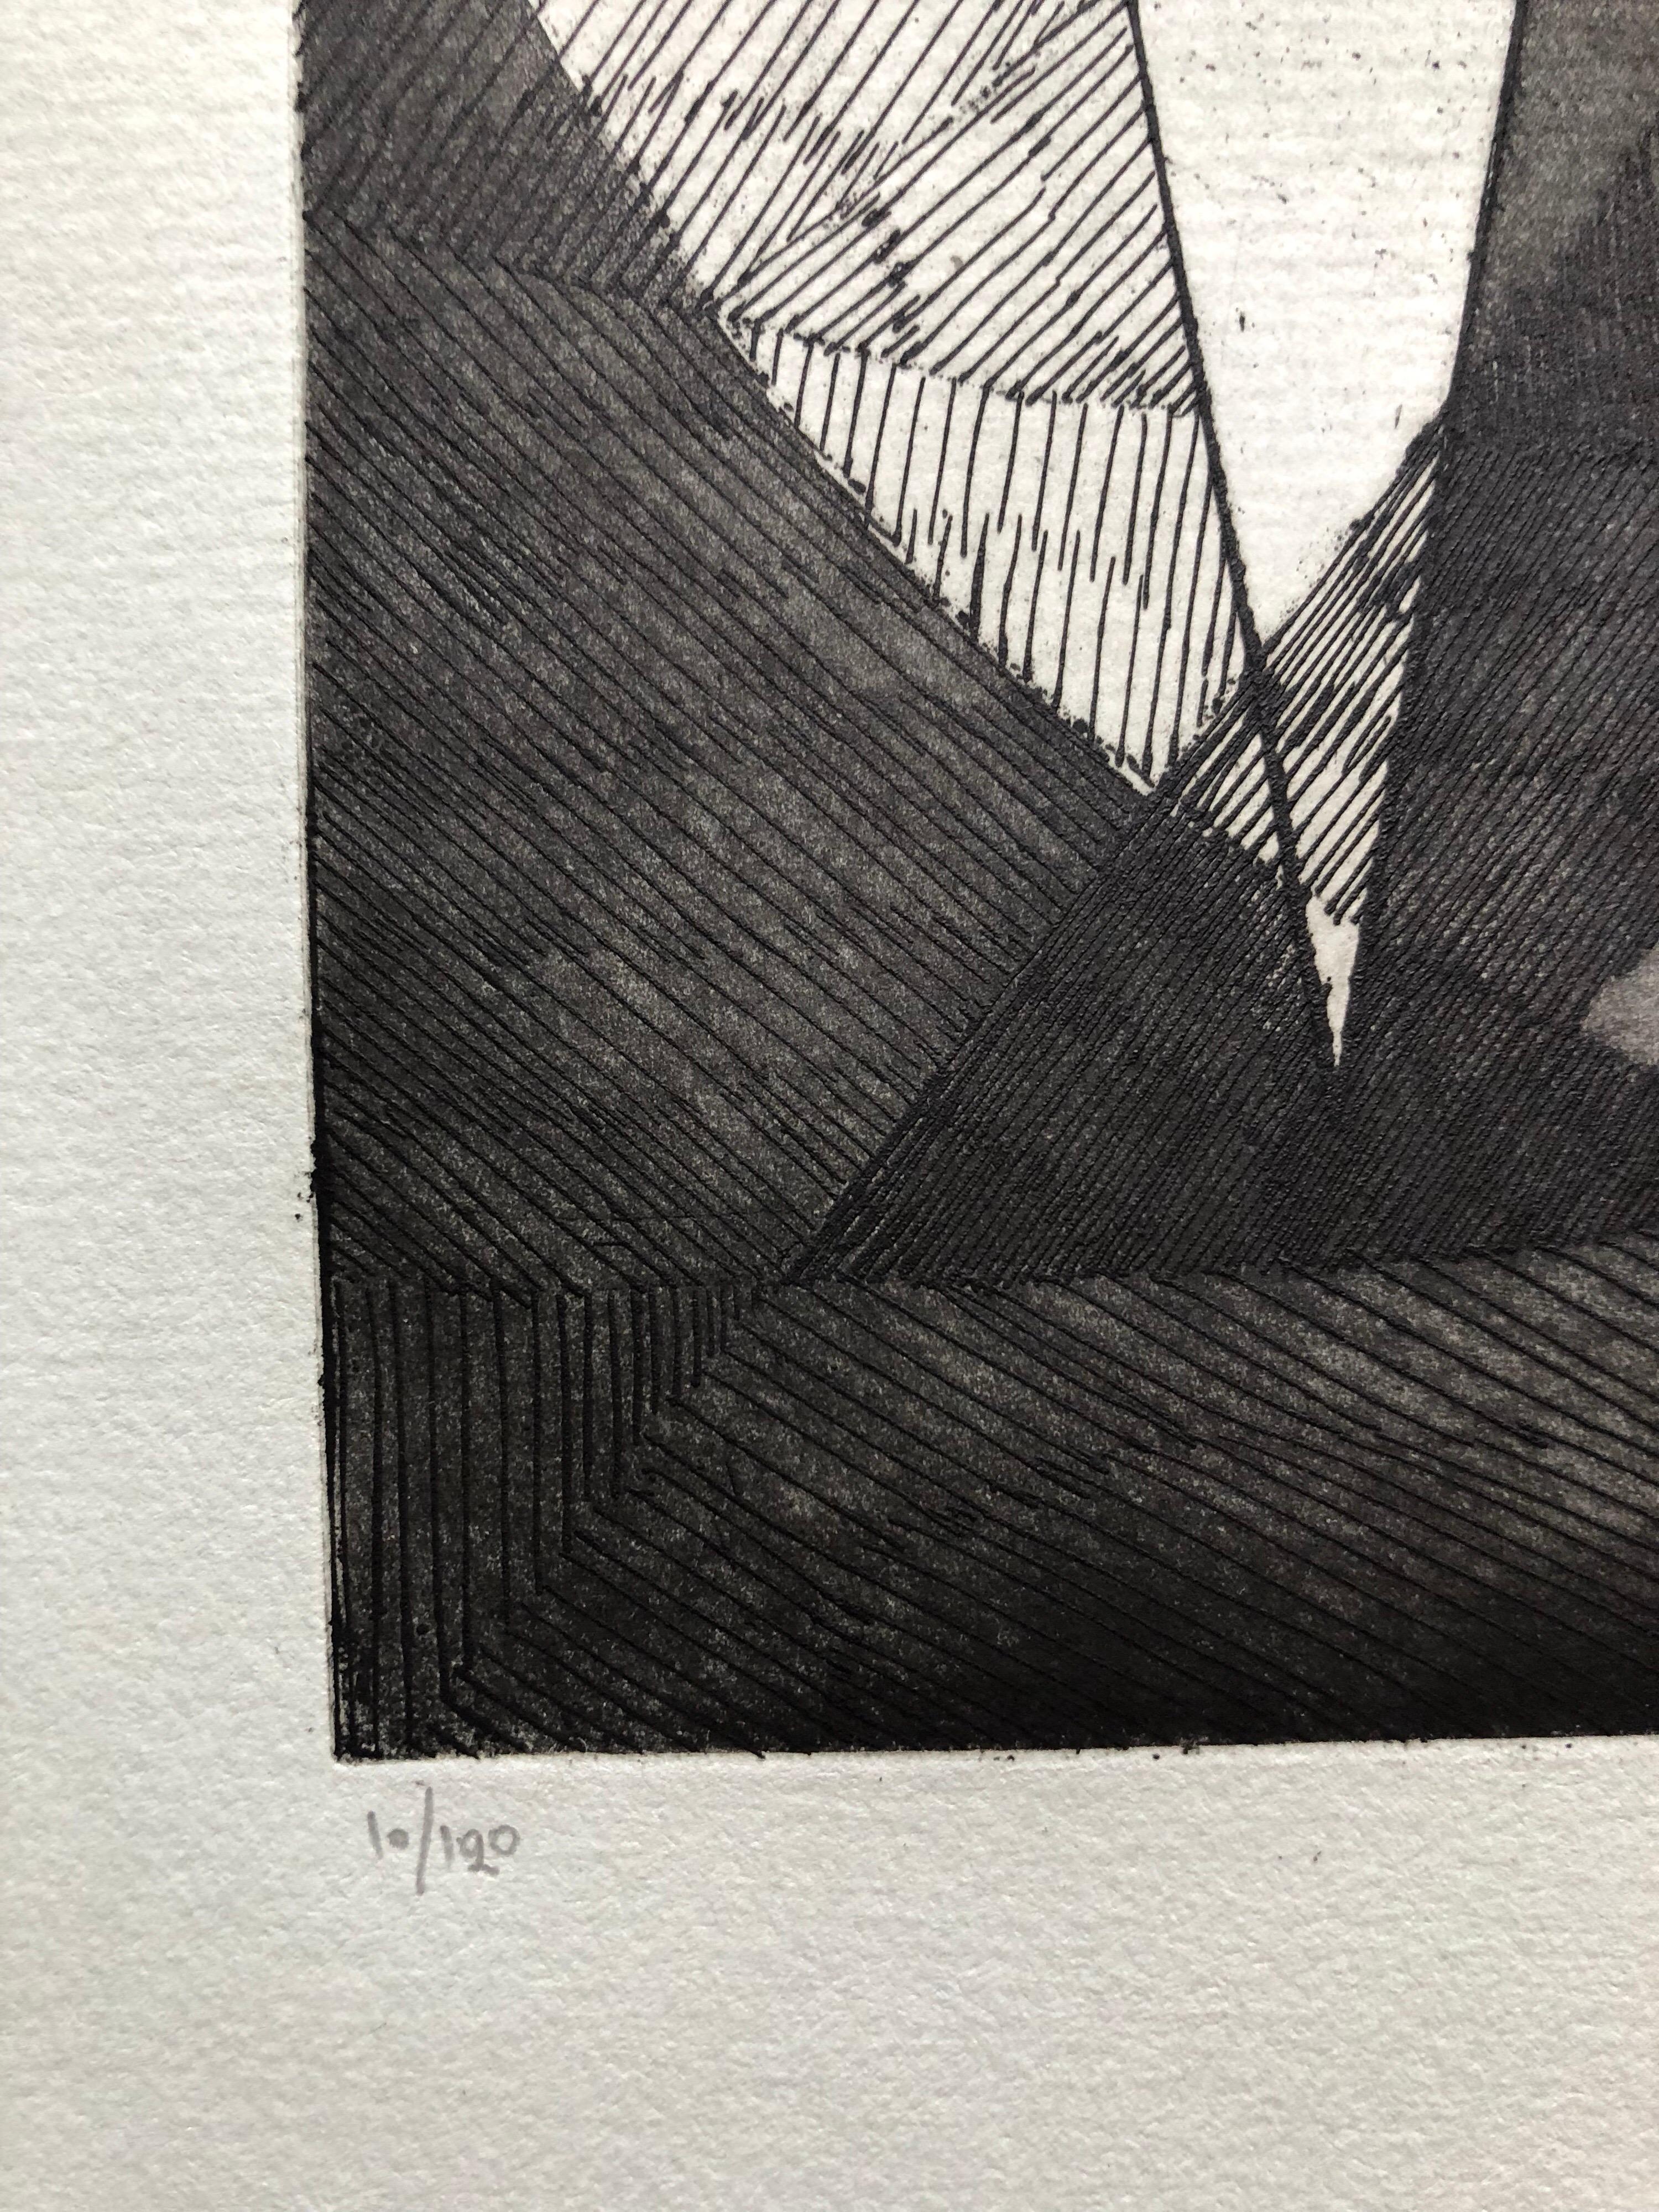 
Original etching, aquaforte, aquatint engraving. Hand pencil signed and numbered. Published by Editions Denise René, Paris. 

Number: 10 from the folio edition of 120 which were on special hand made paper 
Total Edition: 120 signed portfolio copies